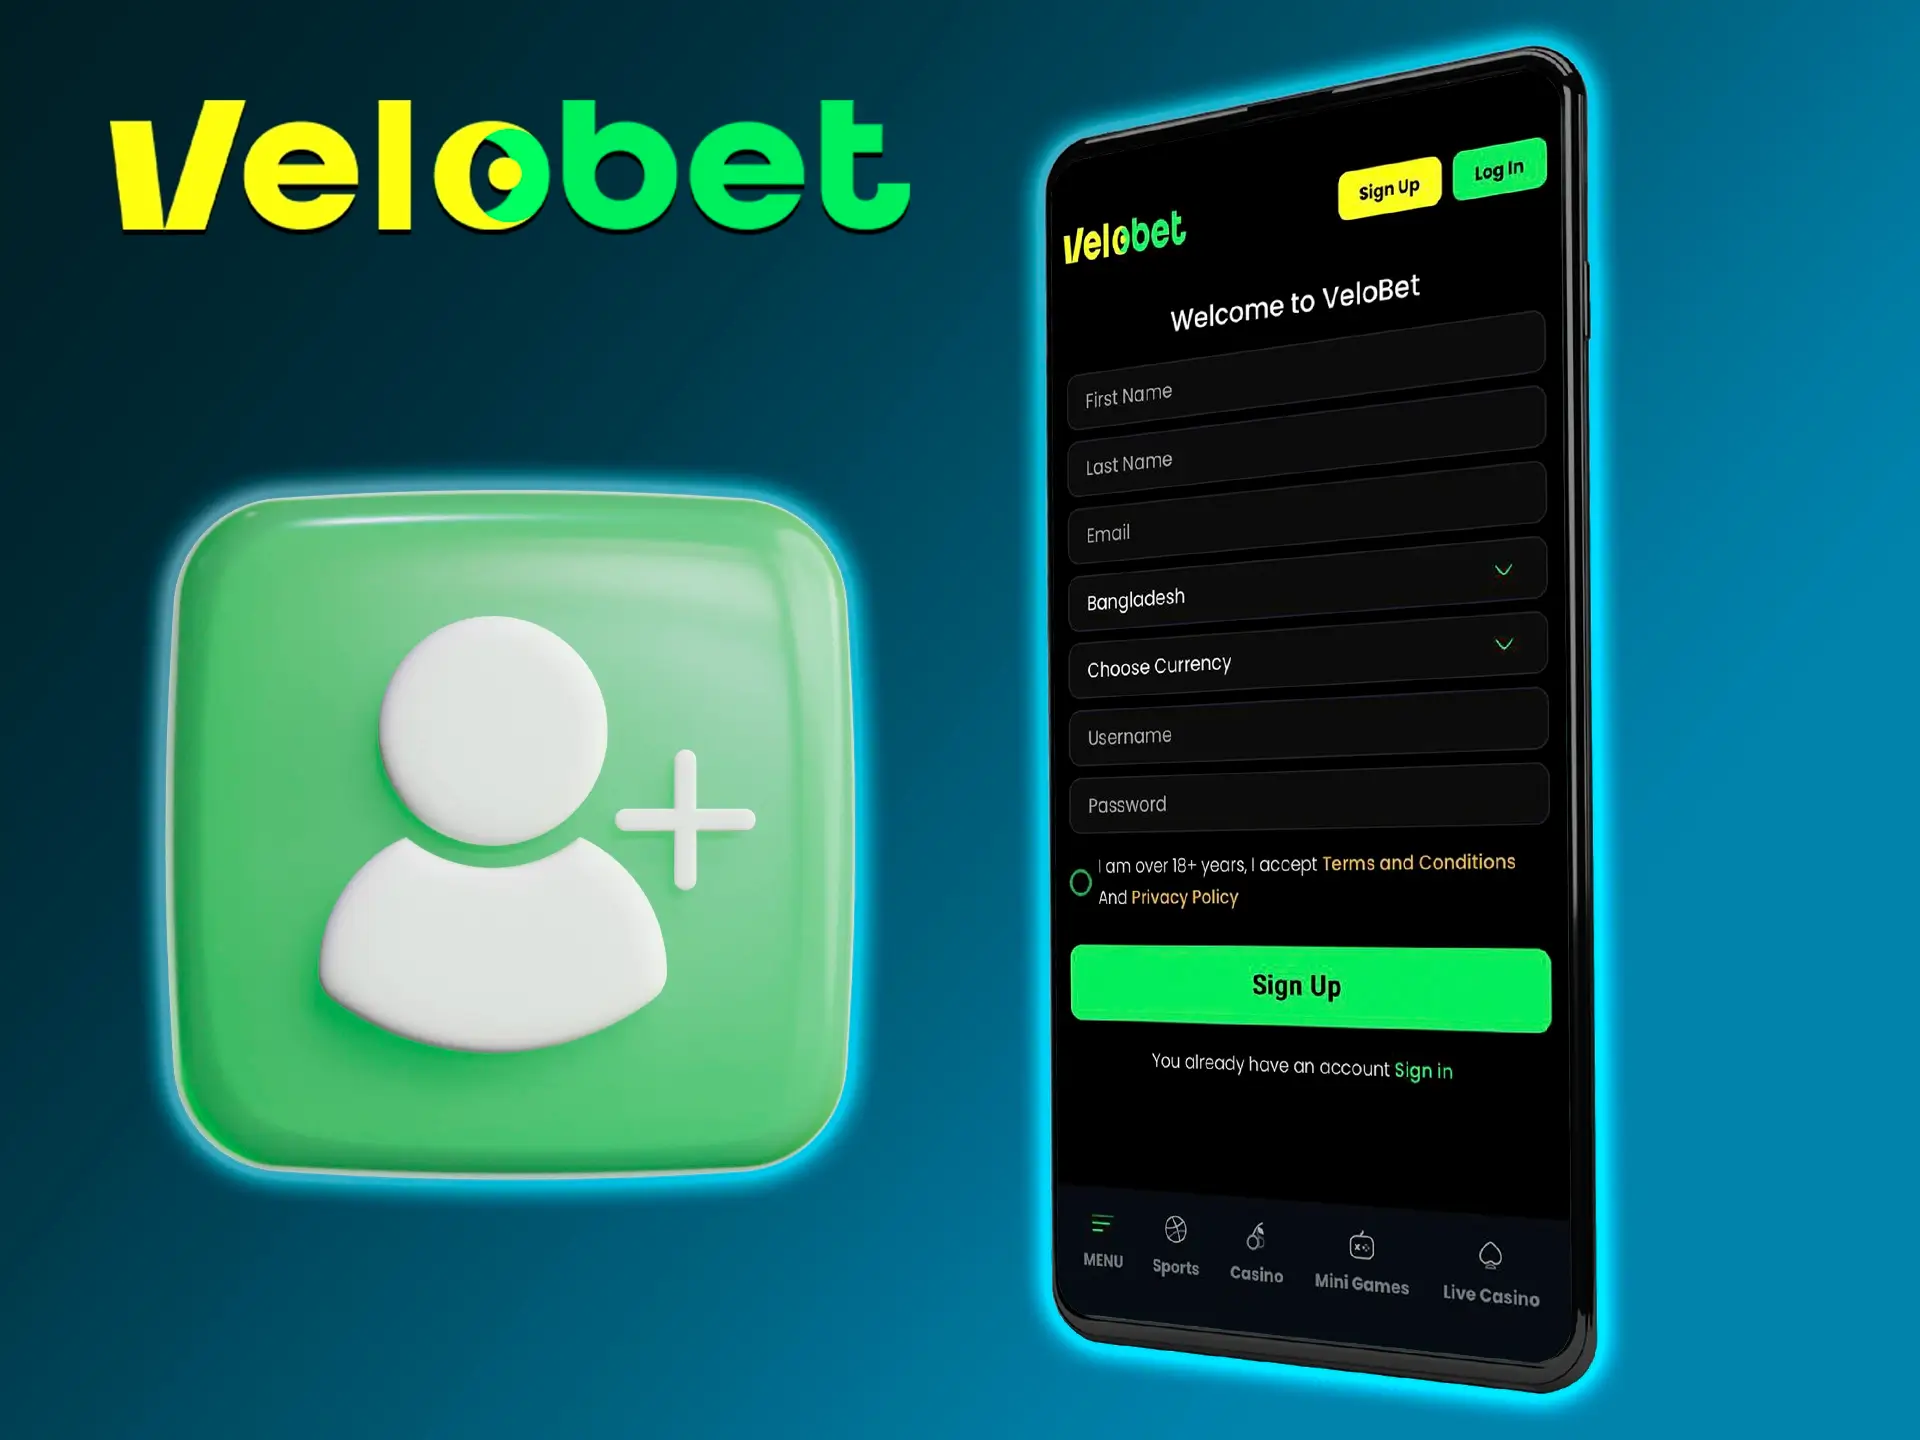 Sign up to the Velobet app to discover the world of betting and casino.